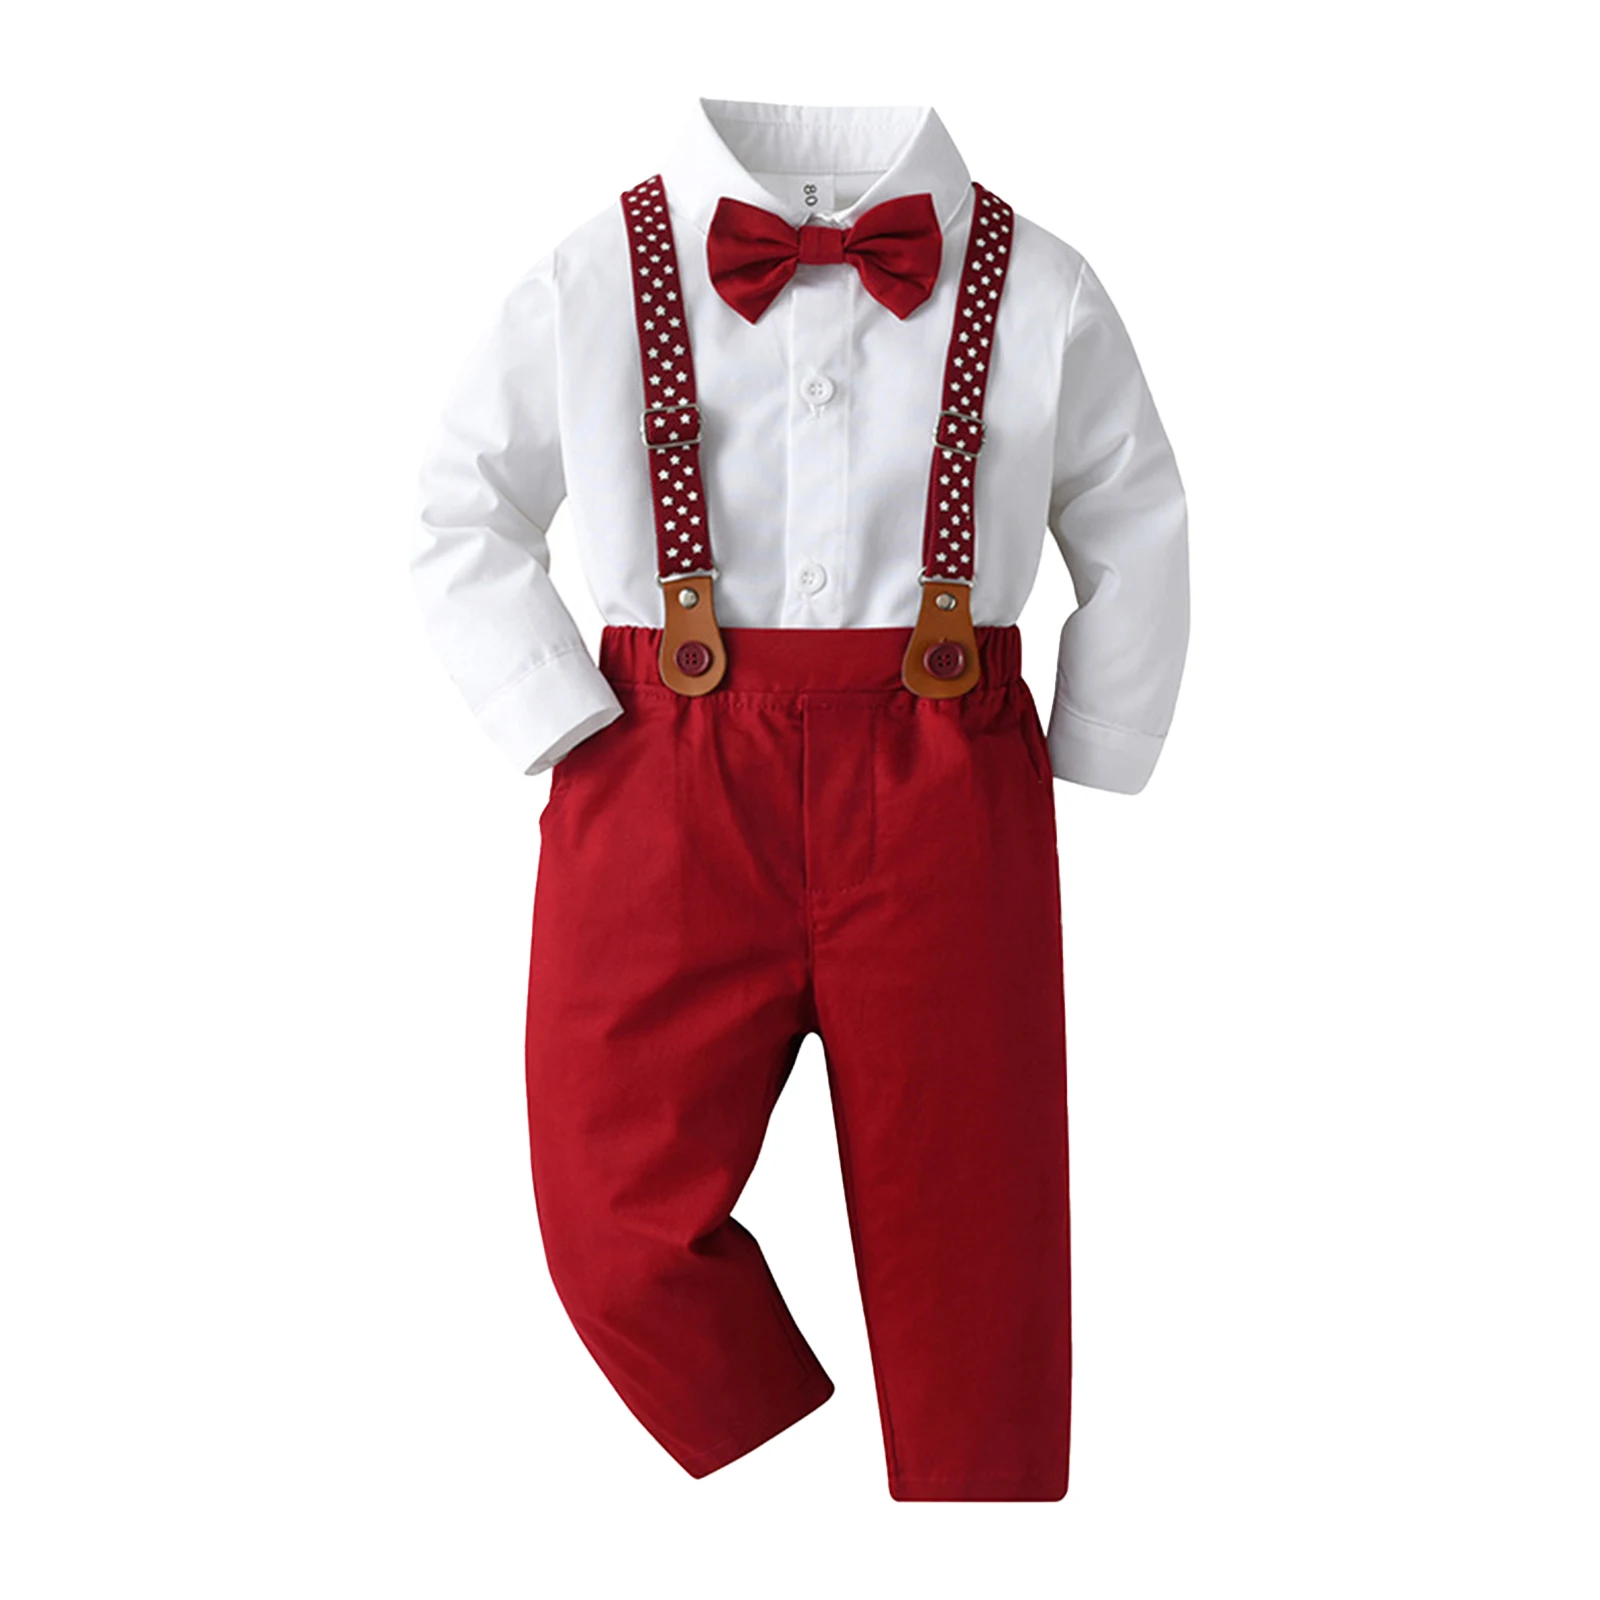 Baby Boys Gentleman Outfit Cotton Clothes Birthday Party Wedding Prom Gown Long Sleeve Shirt Top+Bowtie+Suspender Pants 3Pcs/Set new design flower boys wedding suit 3pcs boys party   shawl lapel costume homme boys spring formal clothing set kids suits